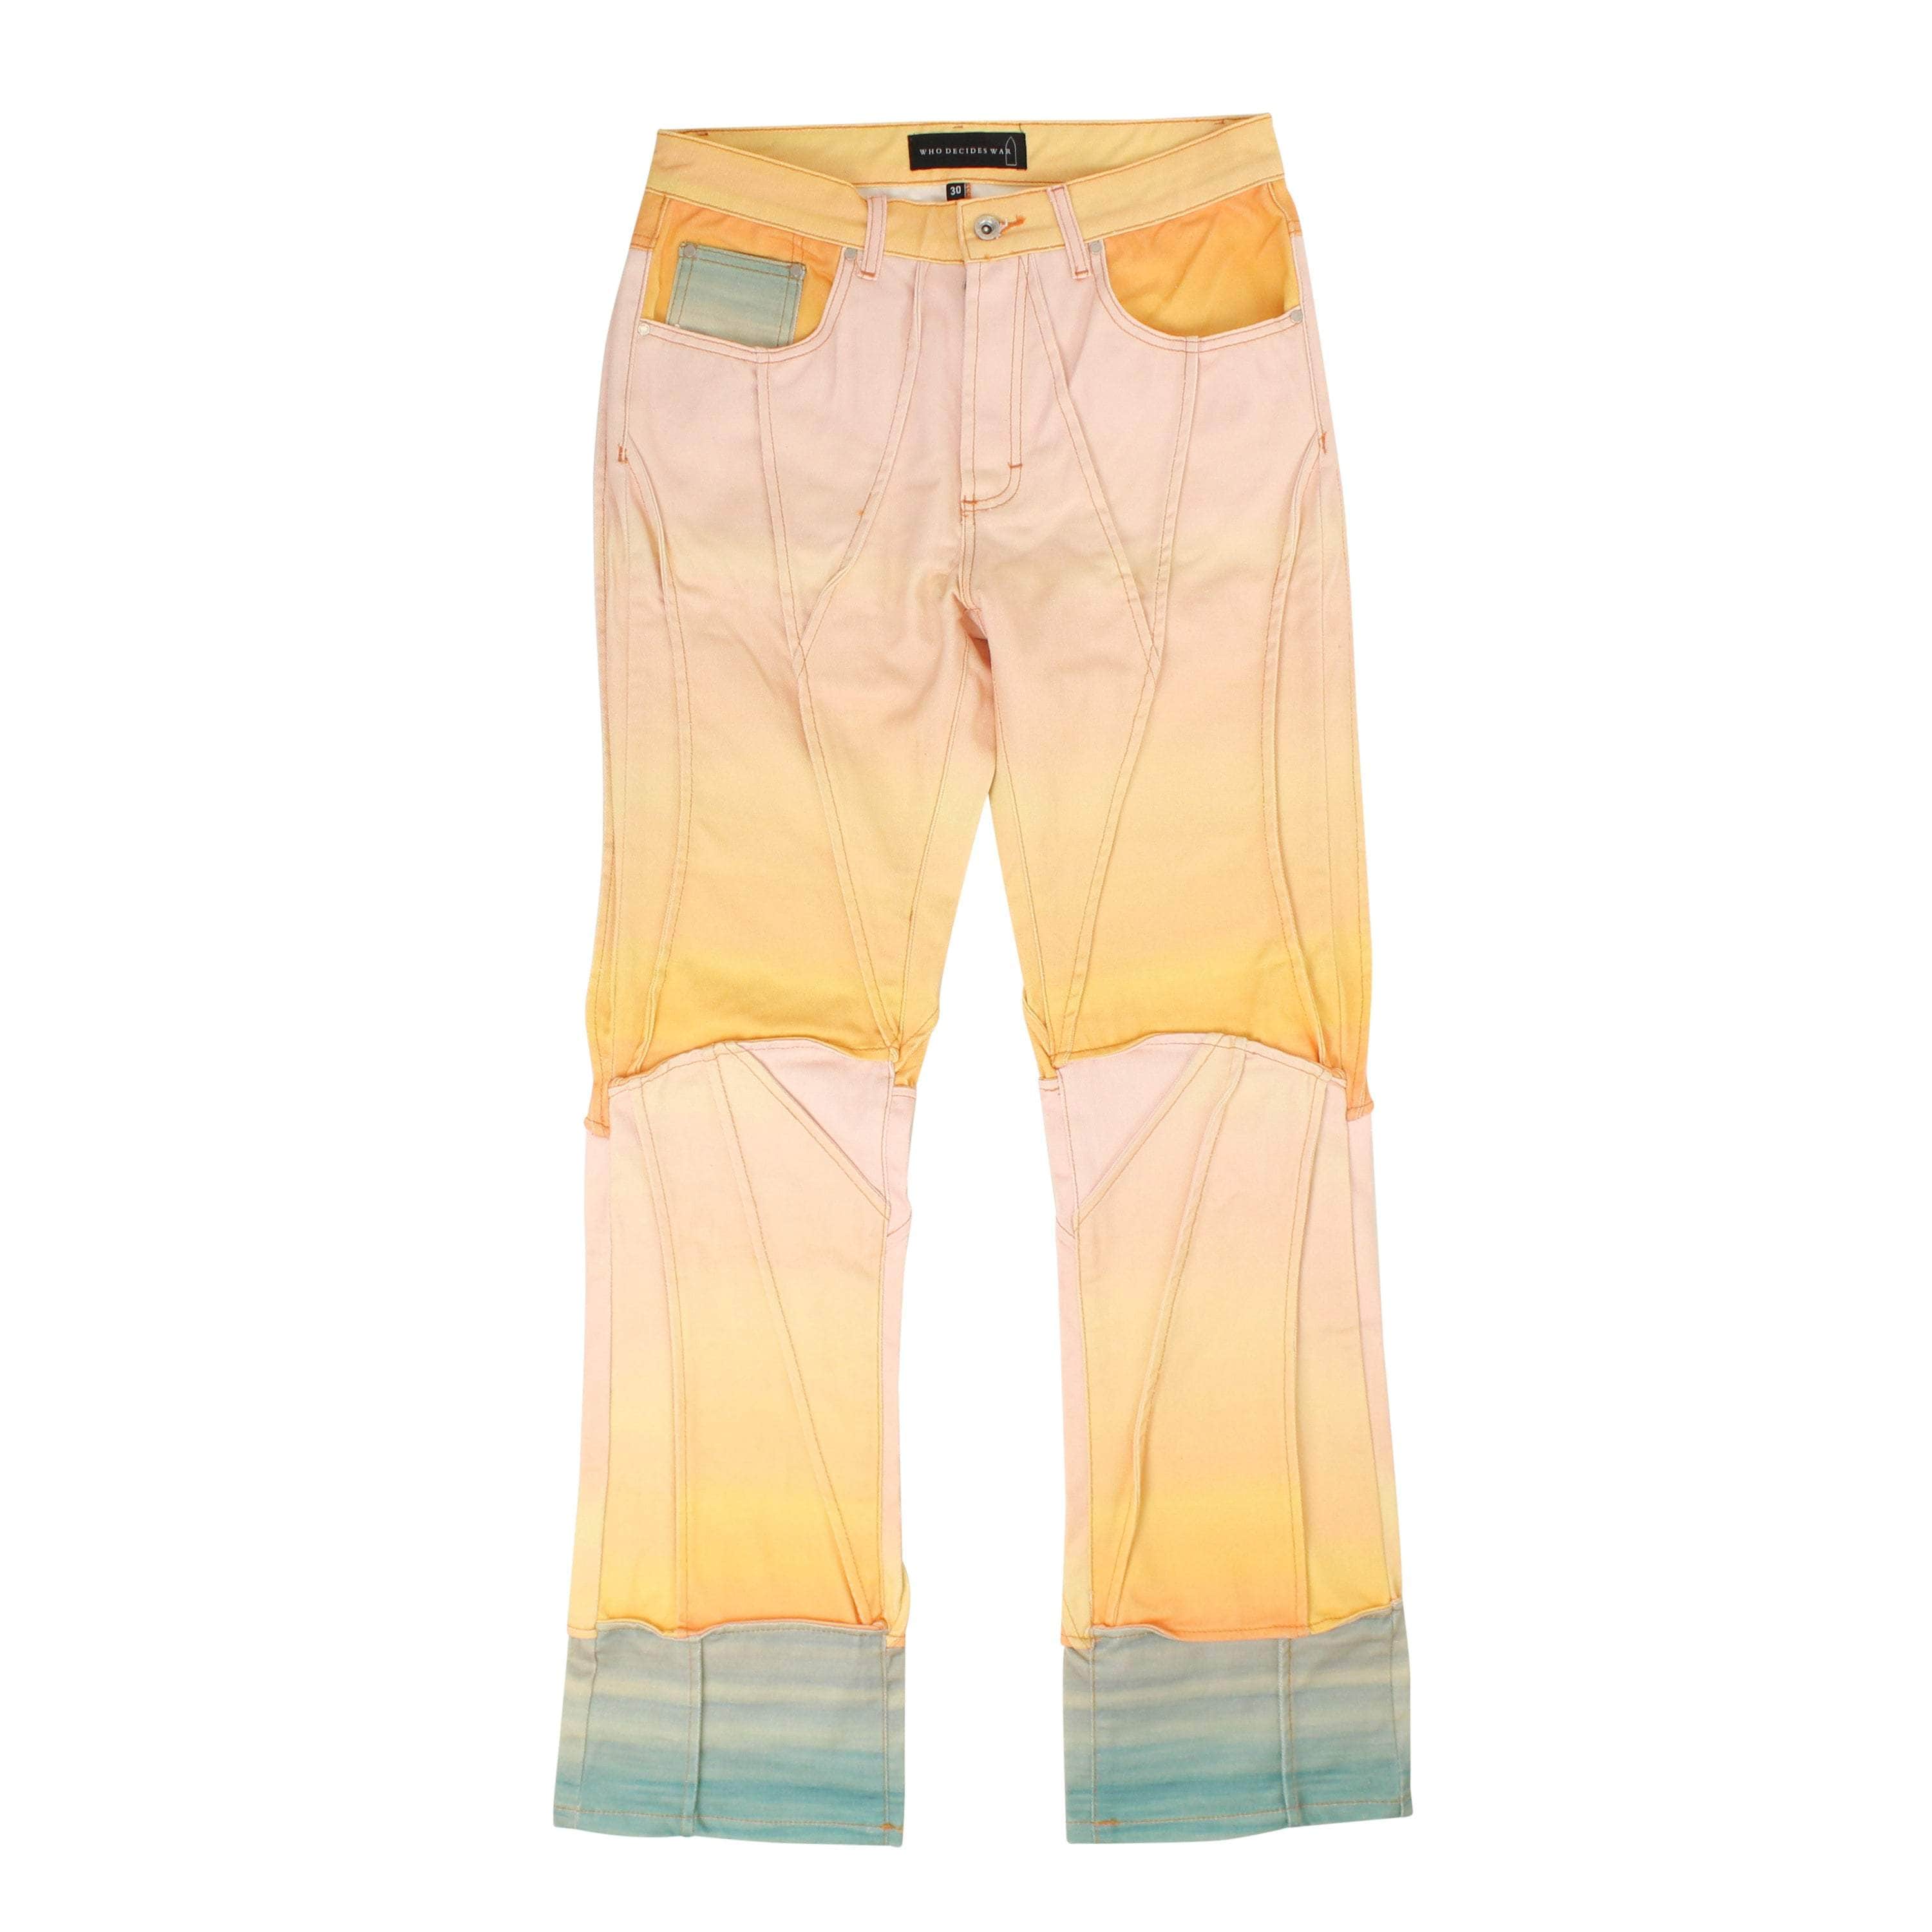 Who Decides War 500-750, channelenable-all, chicmi, couponcollection, main-clothing, mens-straight-fit-jeans, shop375, who-decides-war Multicolored Sunset Pants